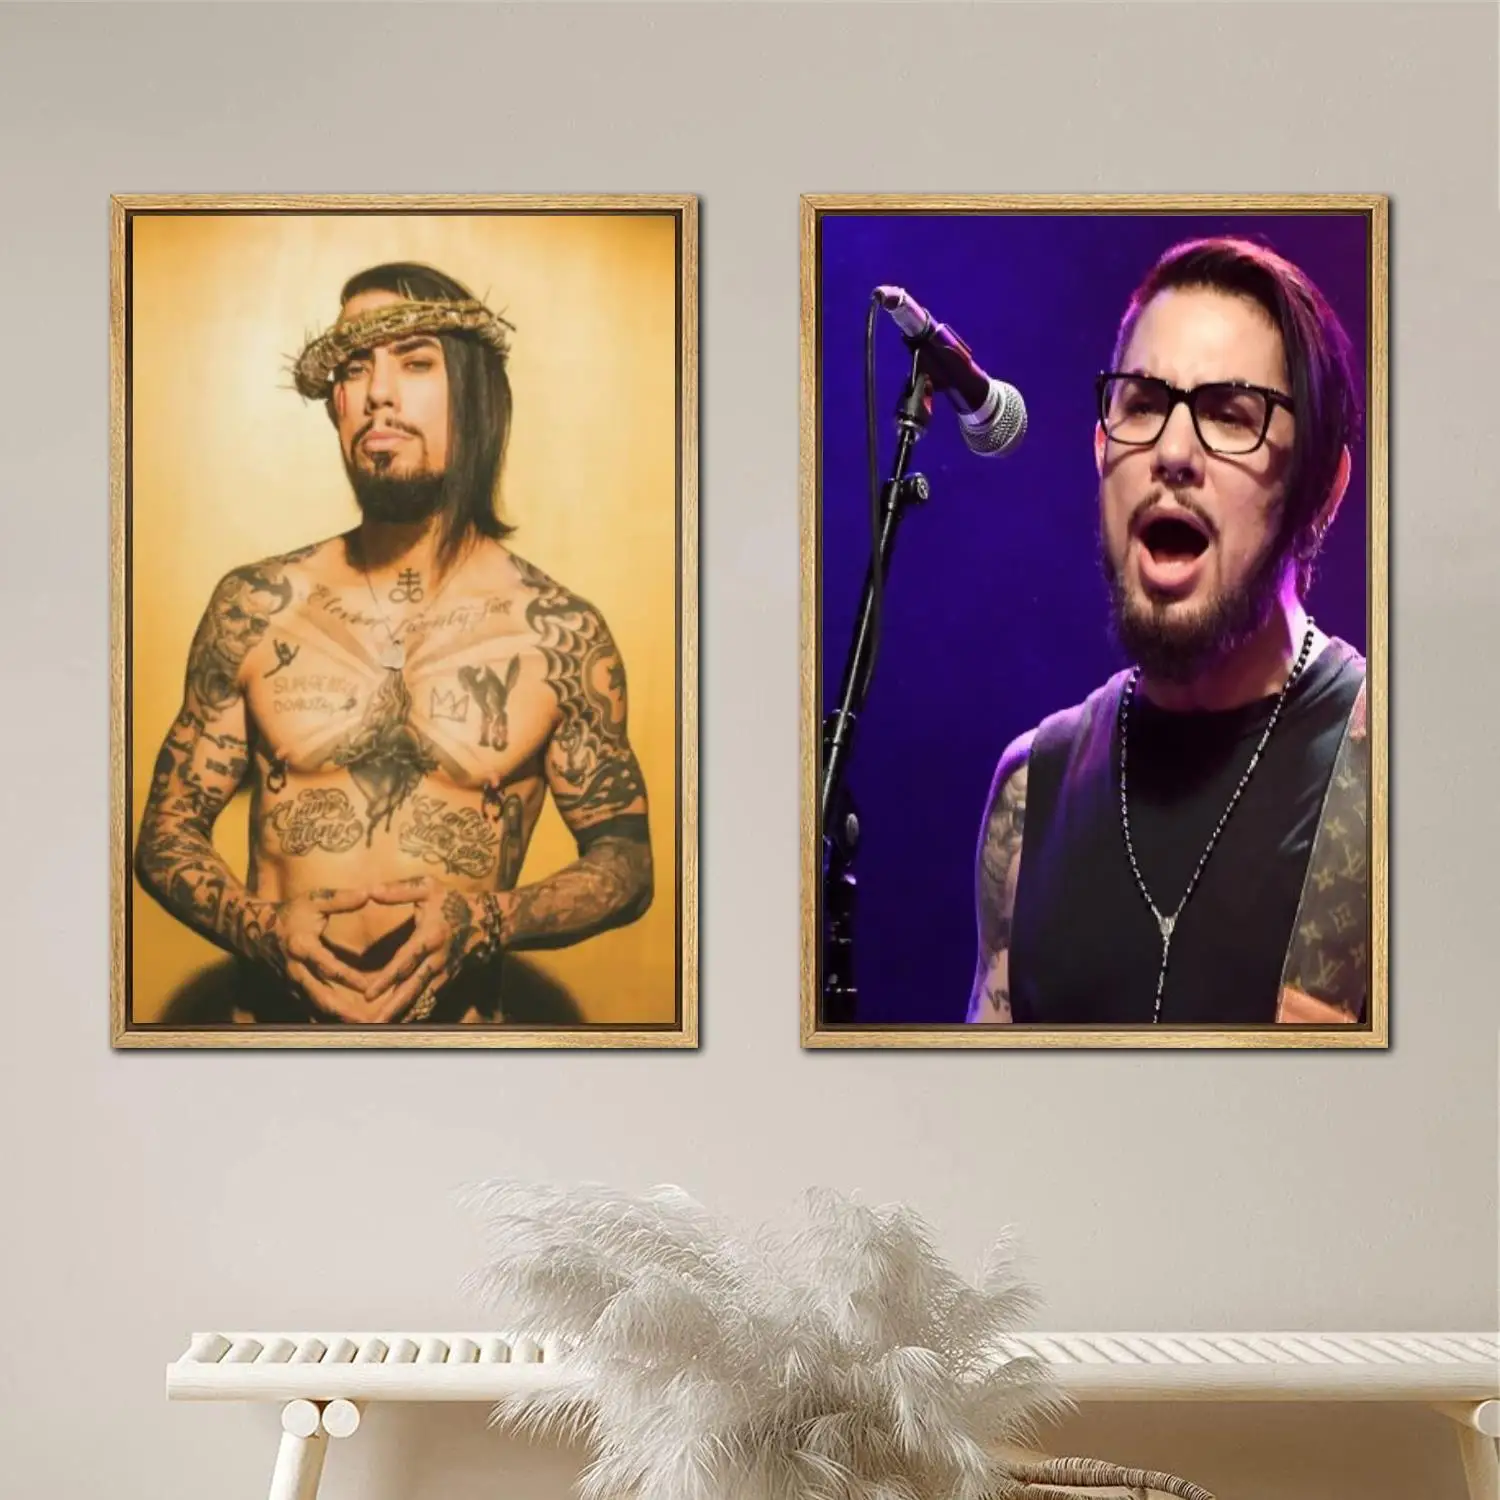 dave Navarro Poster Painting 24x36 Wall Art Canvas Posters room decor Modern Family bedroom Decoration Art wall decor